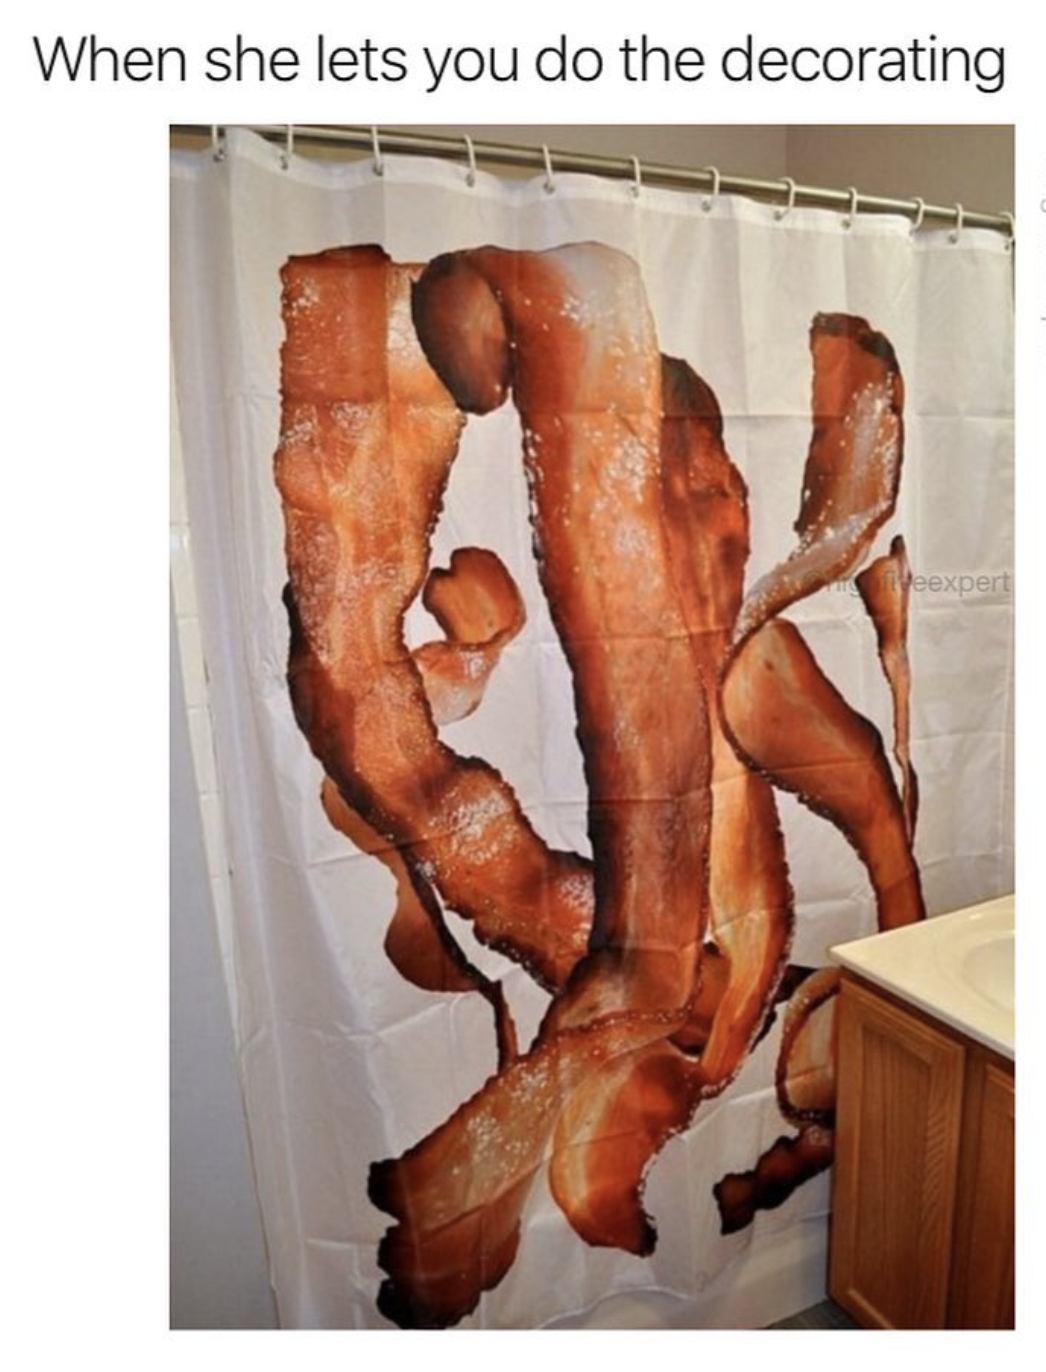 Meme about the funny shower curtains you buy when she lets you do the decorating.